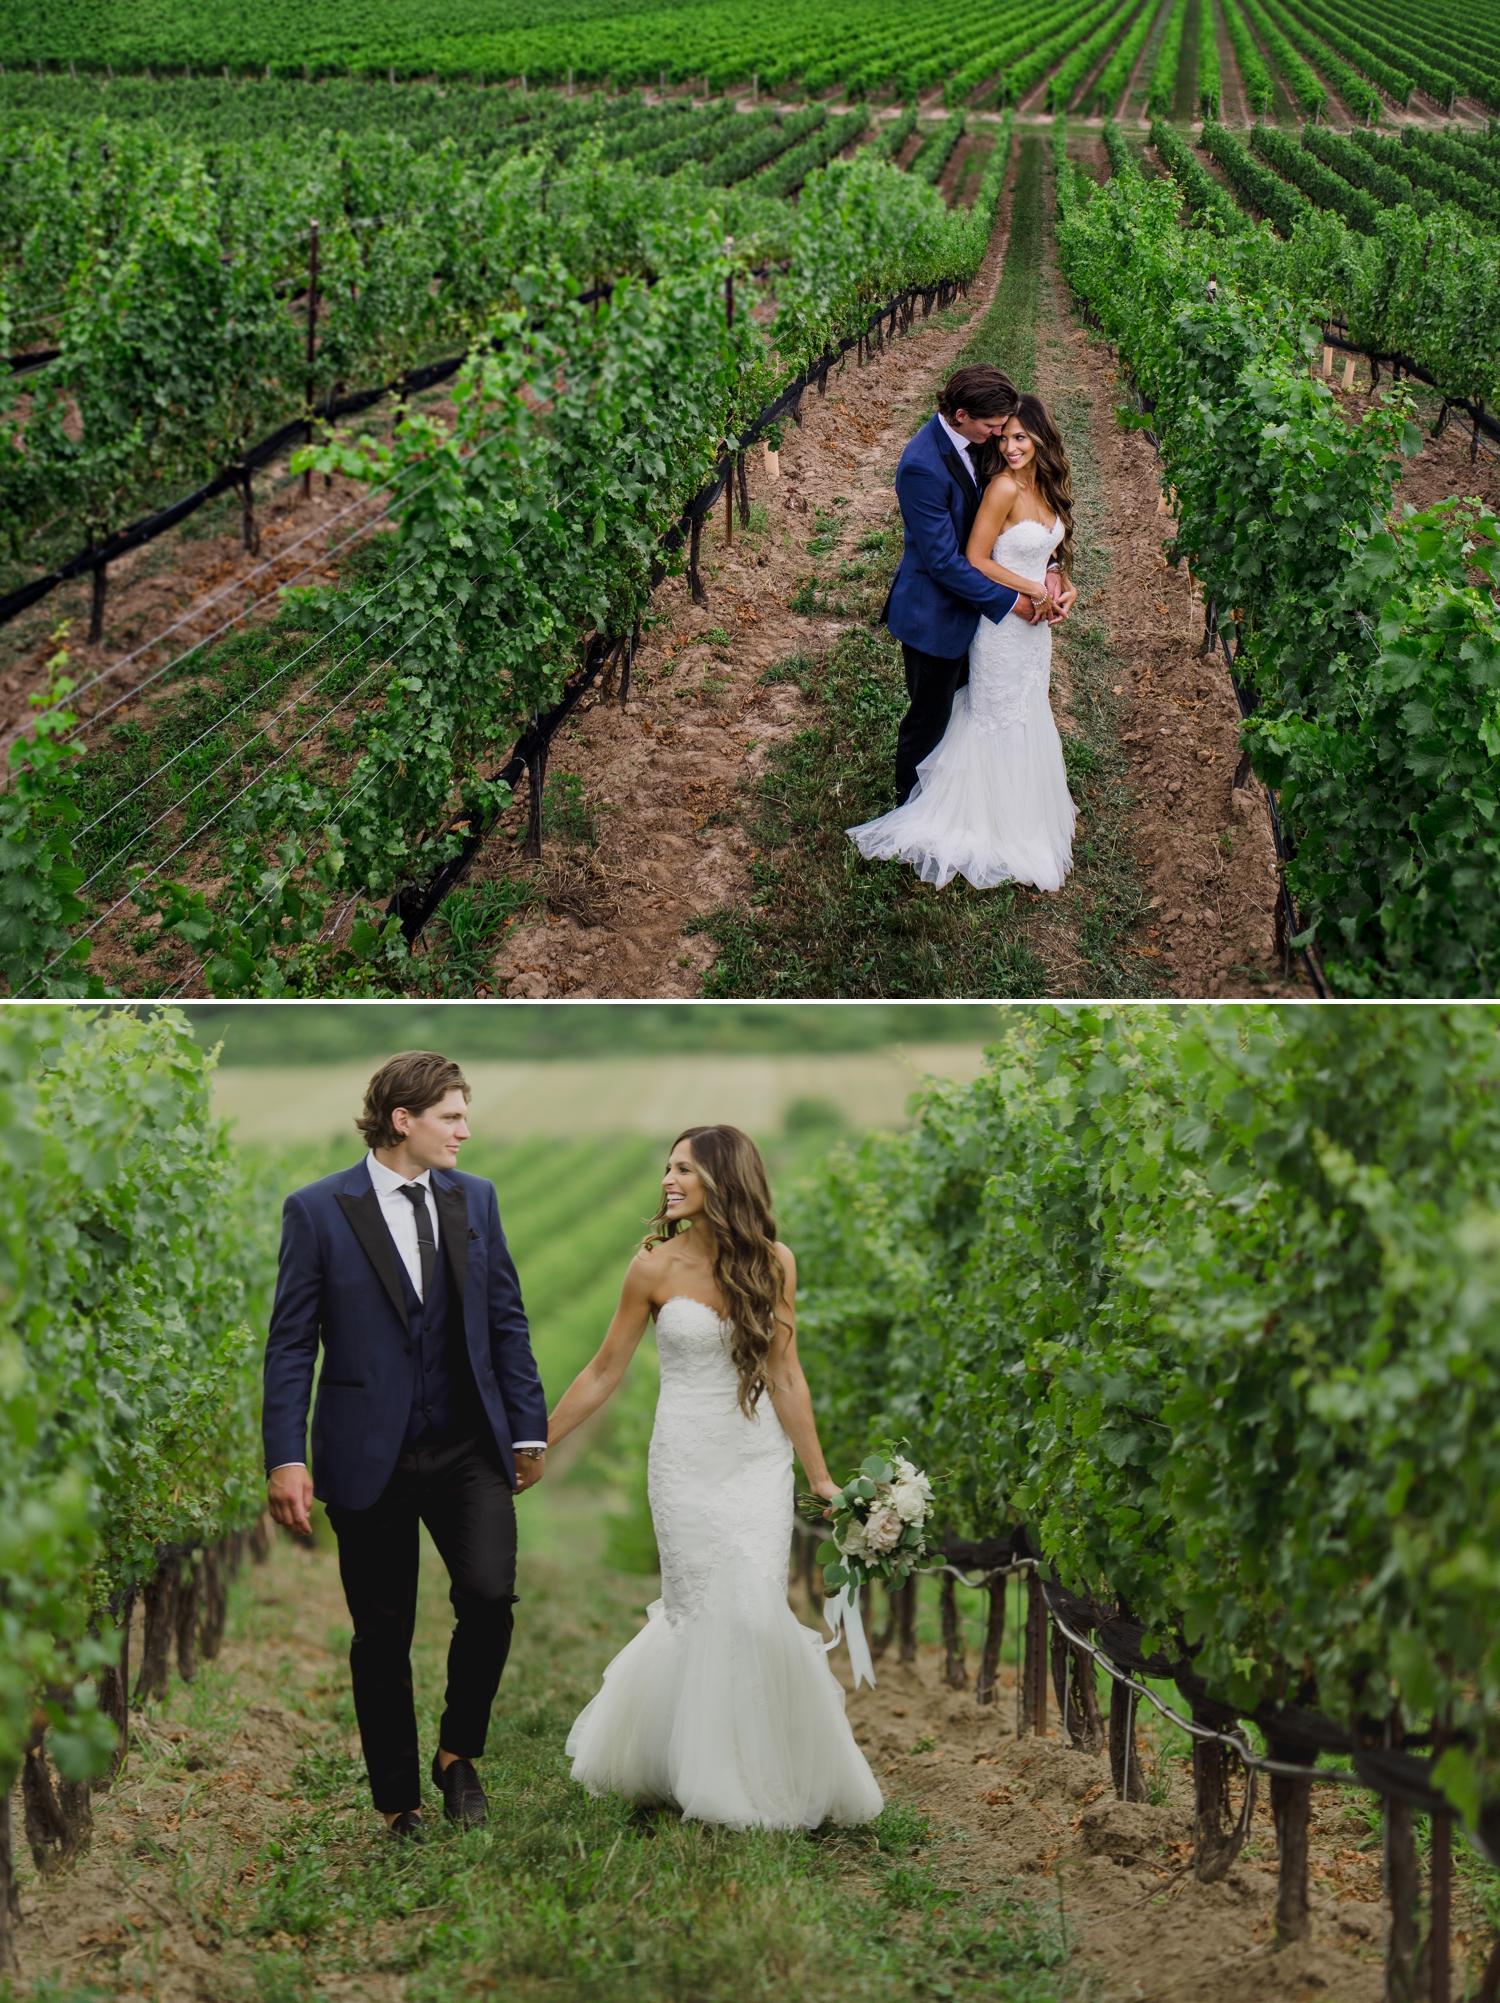 photos of the bride and groom during a wedding at the ravine vineyard in niagara on the lake ontario